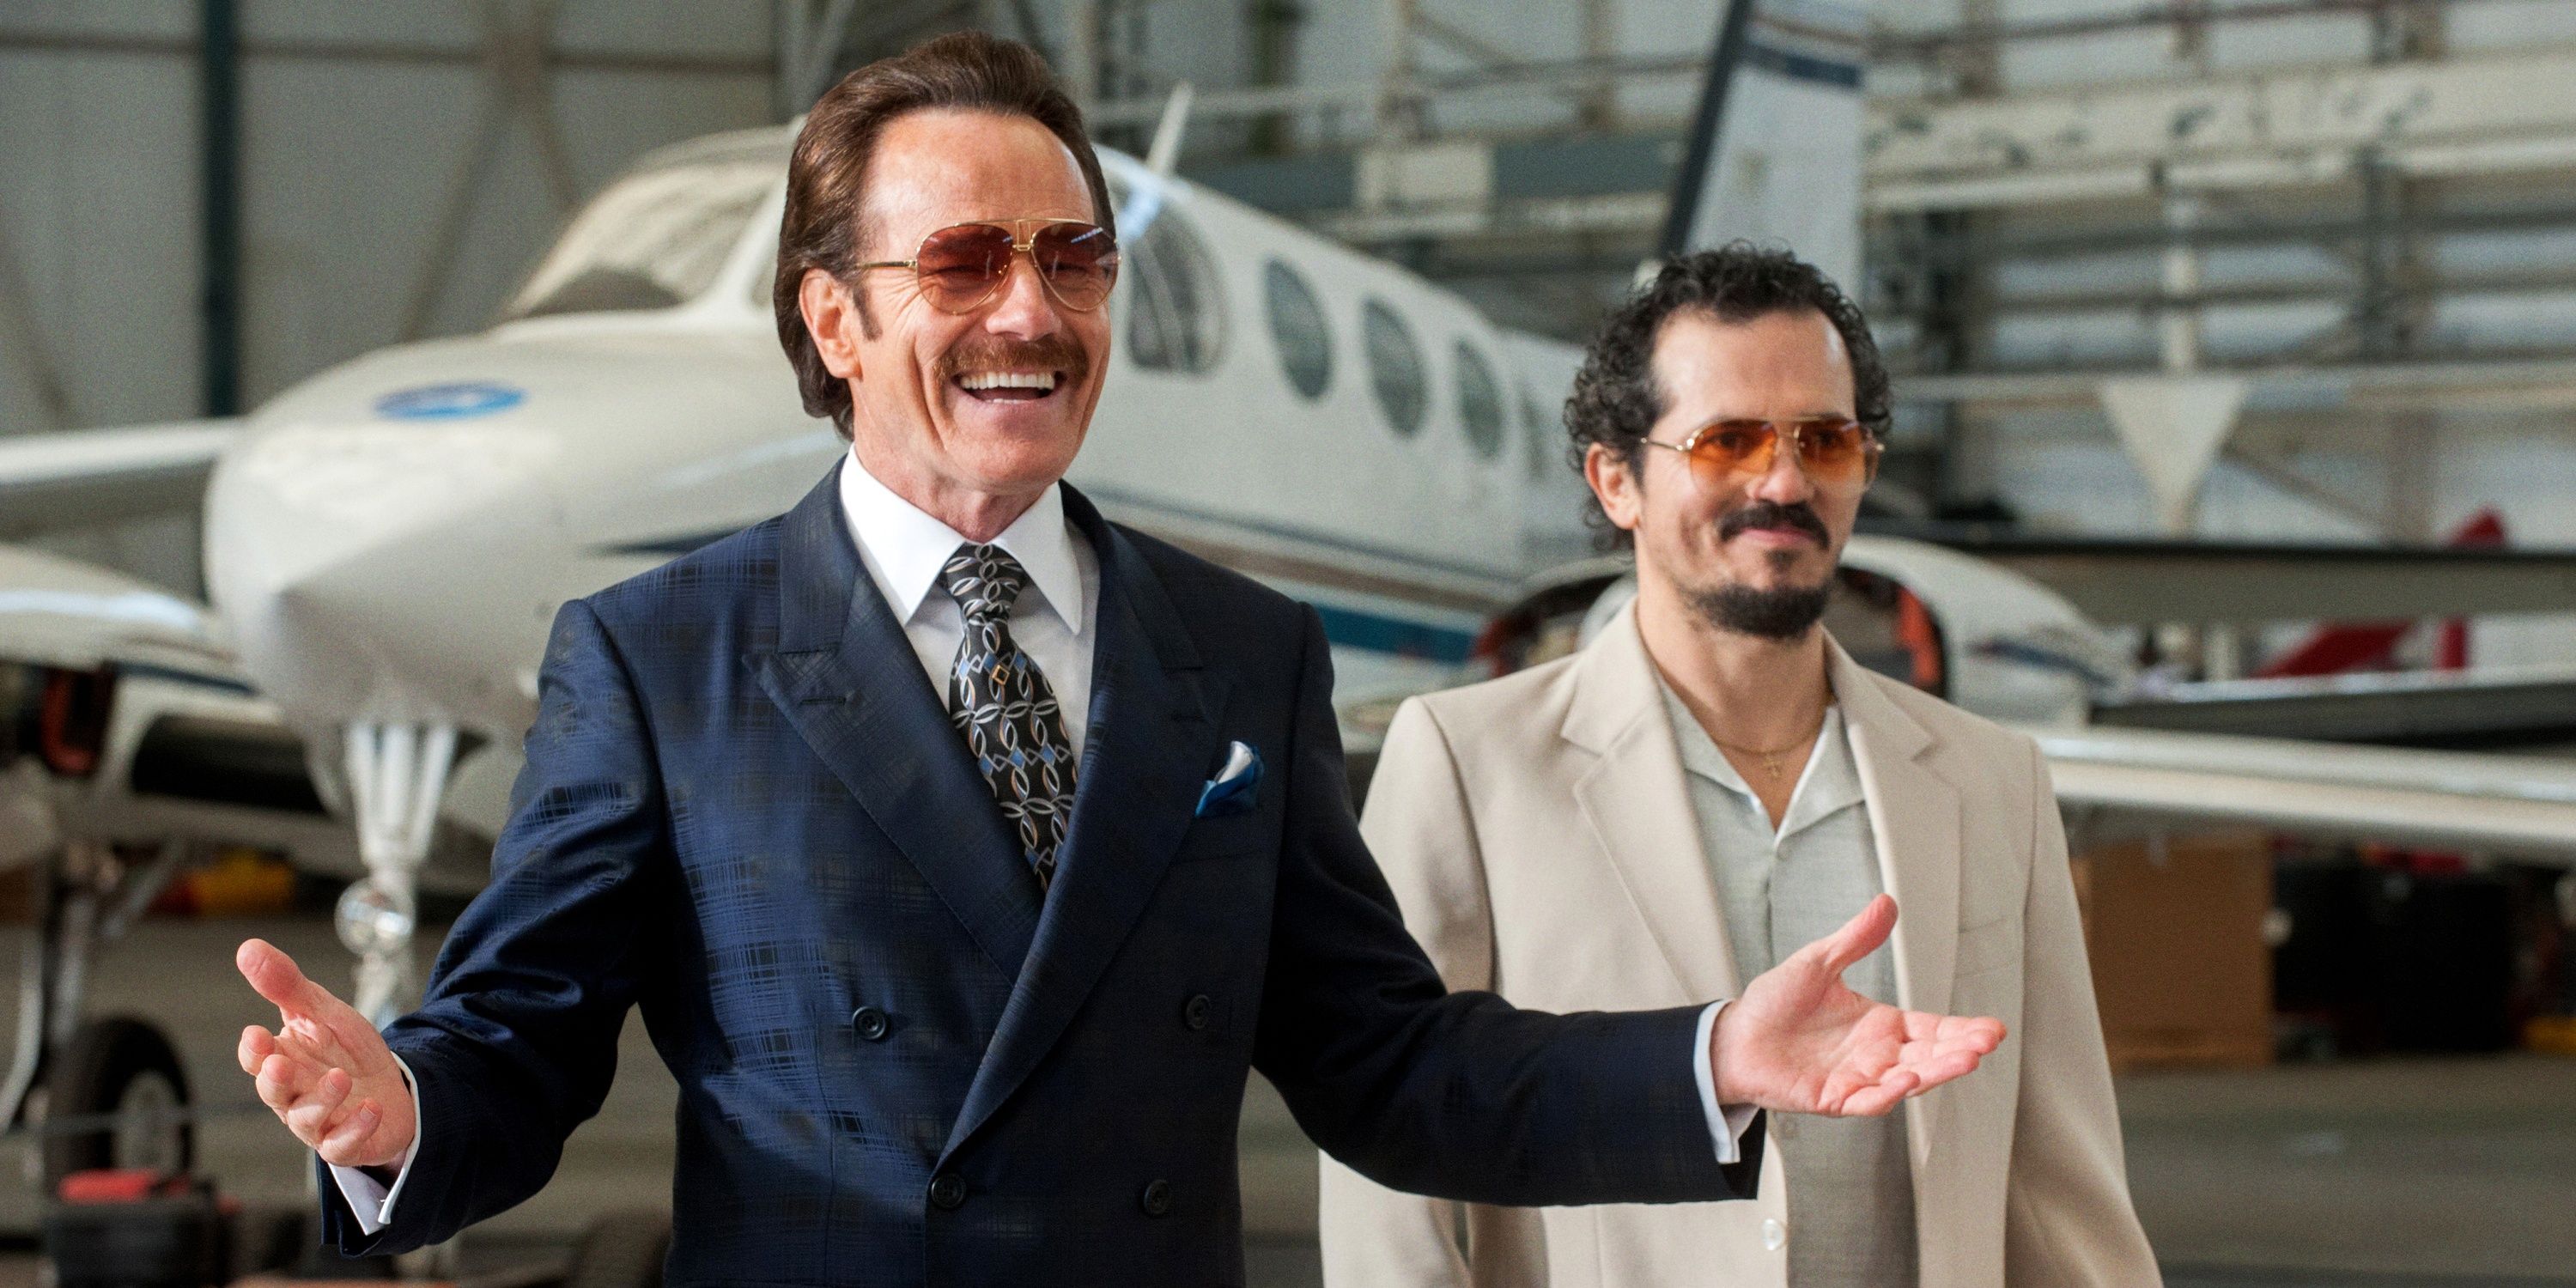 Bryan Cranston and John Leguizamo in The Infiltrator smiling and standing in front of a plane